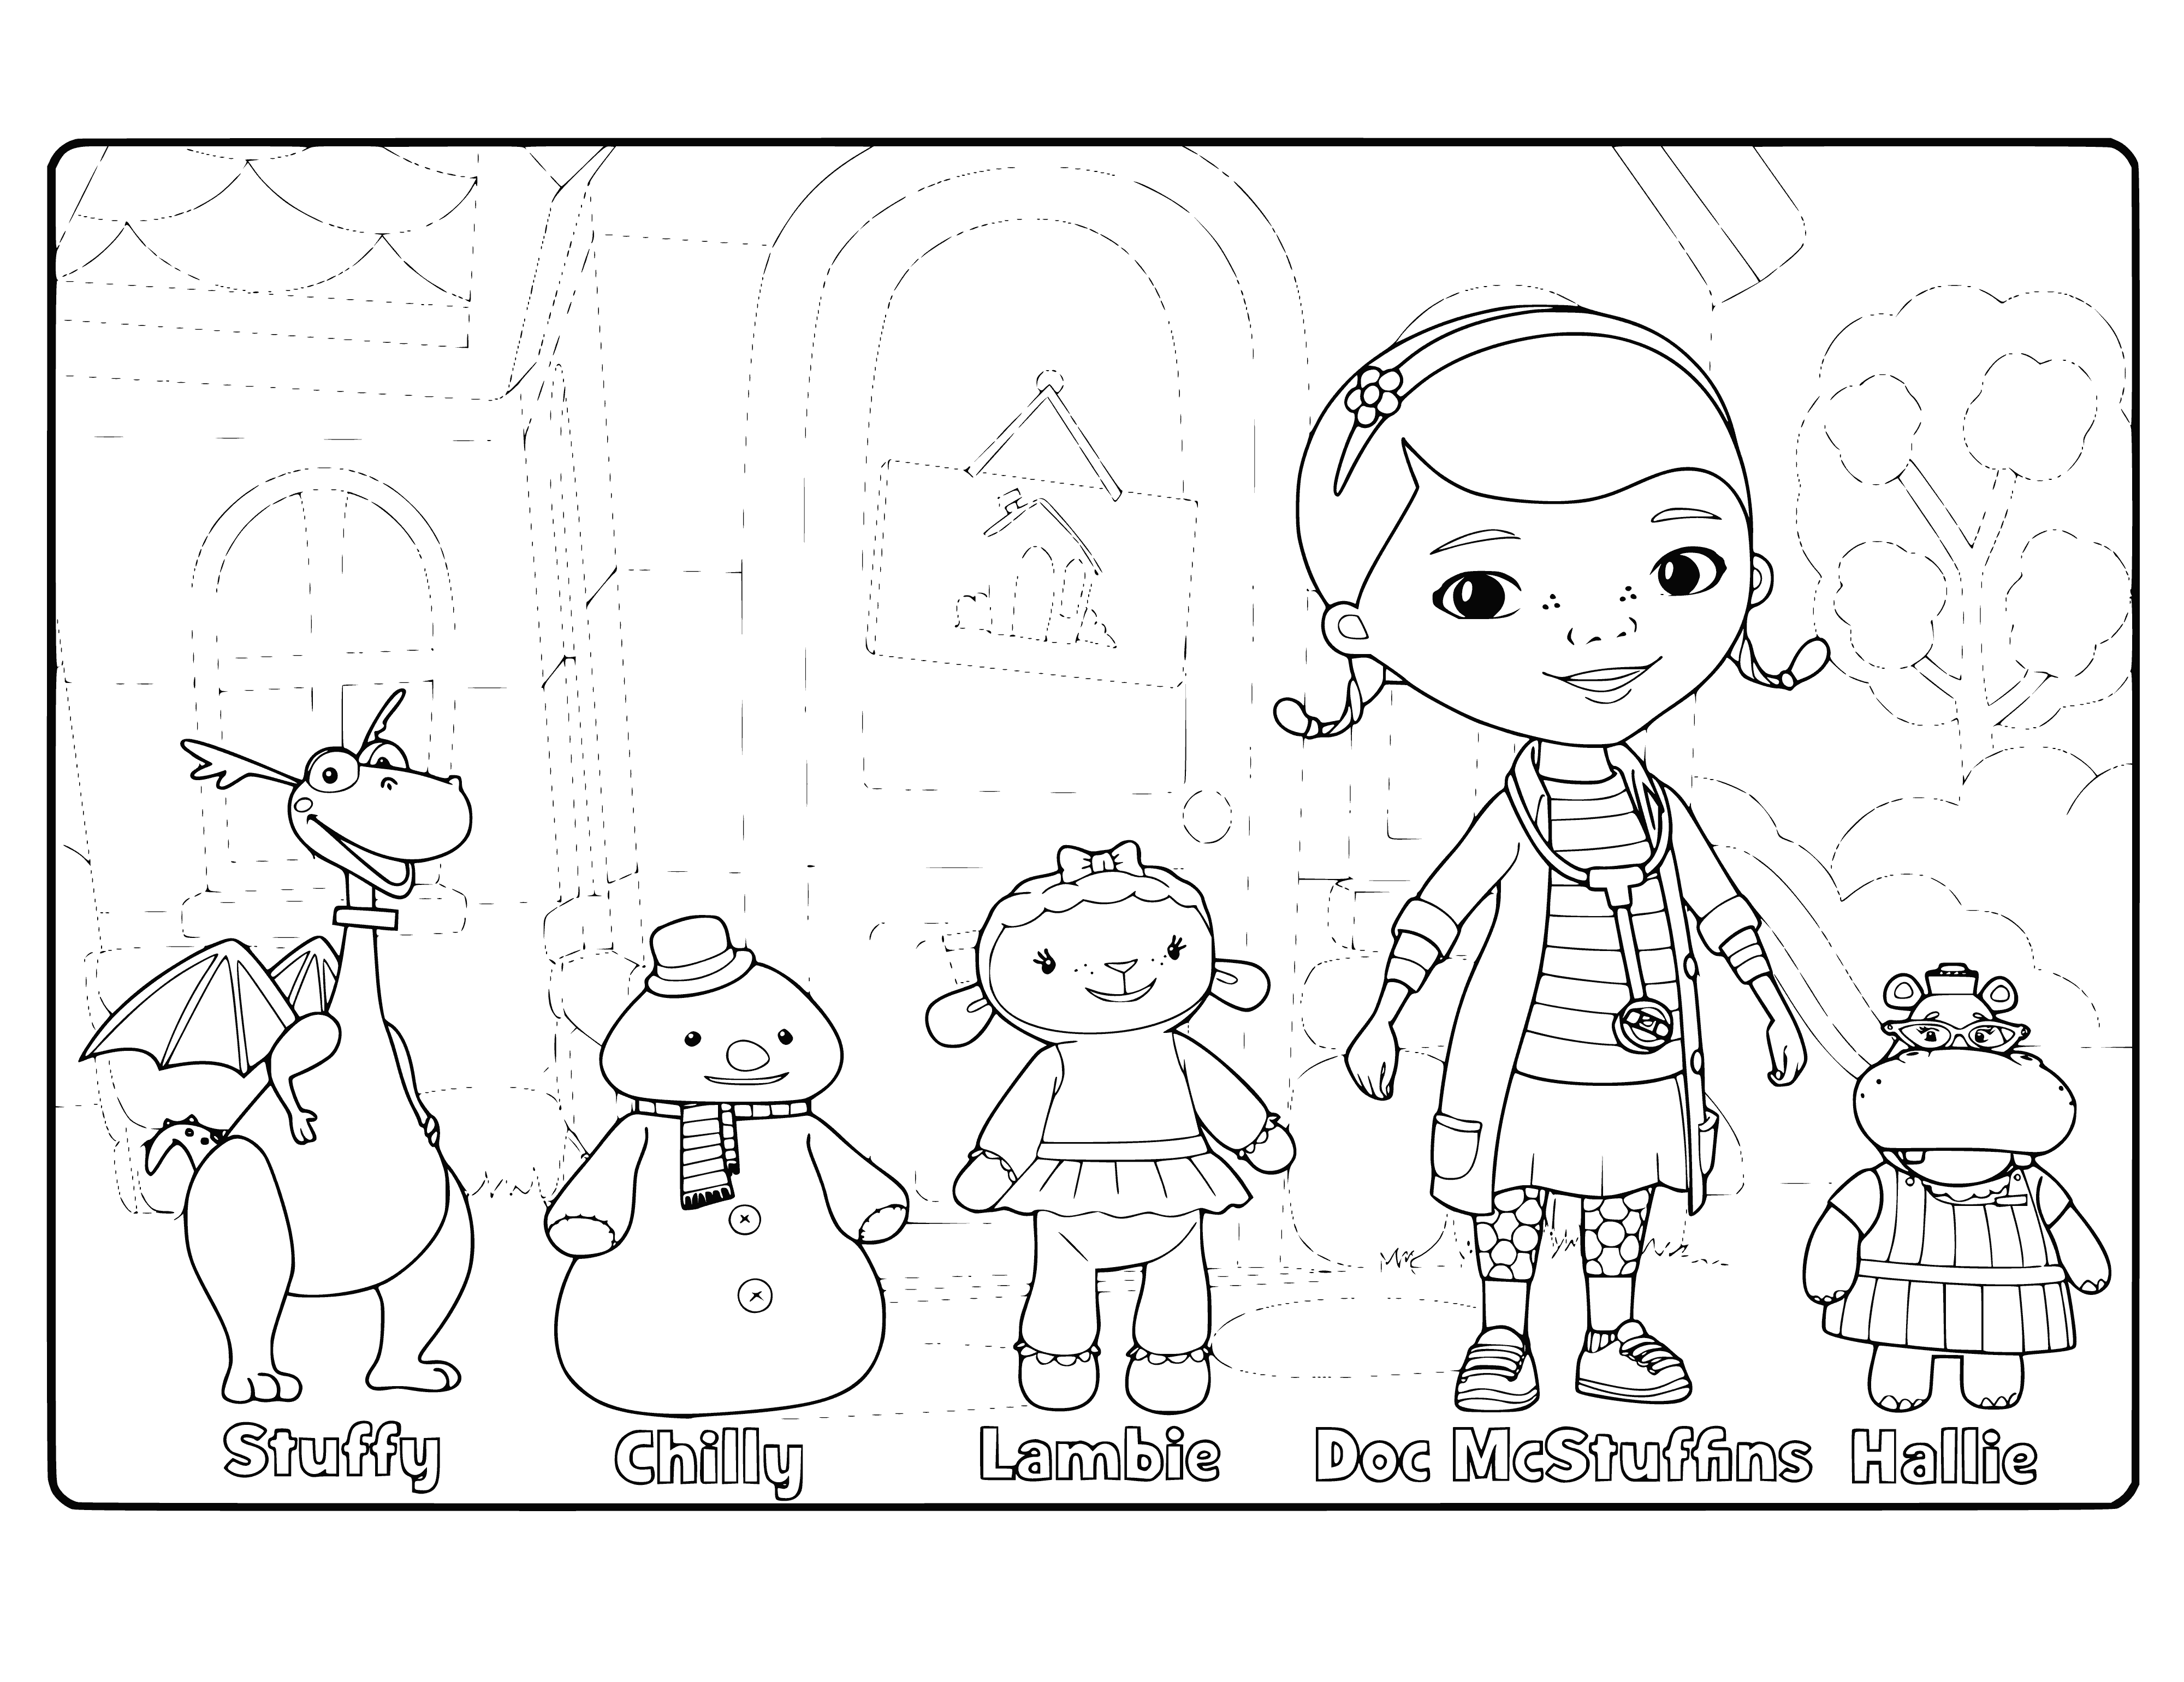 coloring page: Doctor Plusheva and friends help sick animals get better at the hospital. #helpout